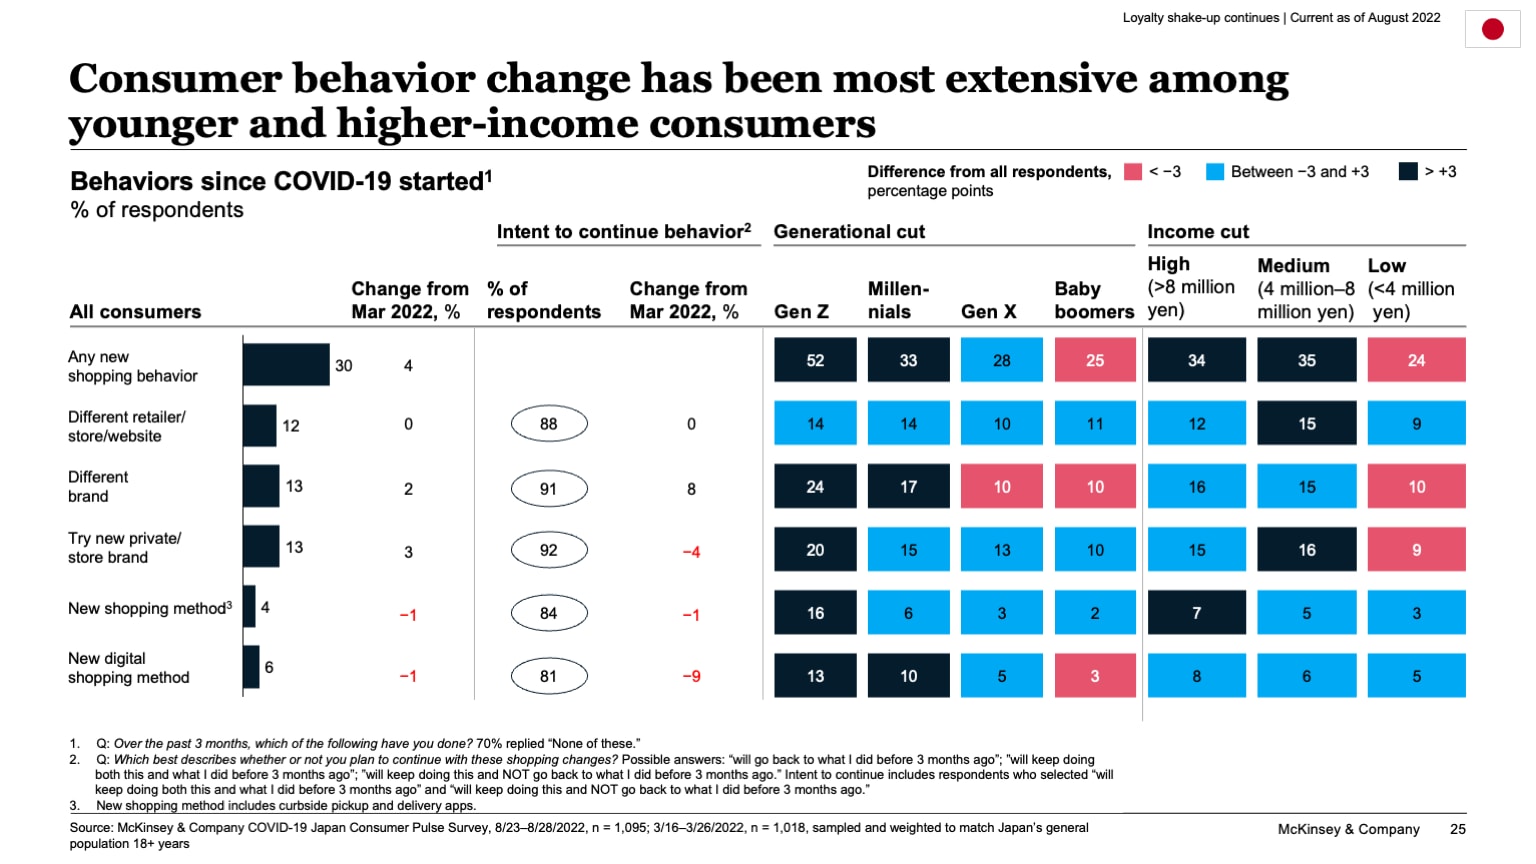 Consumer behavior change has been most extensive among younger and higher-income consumers